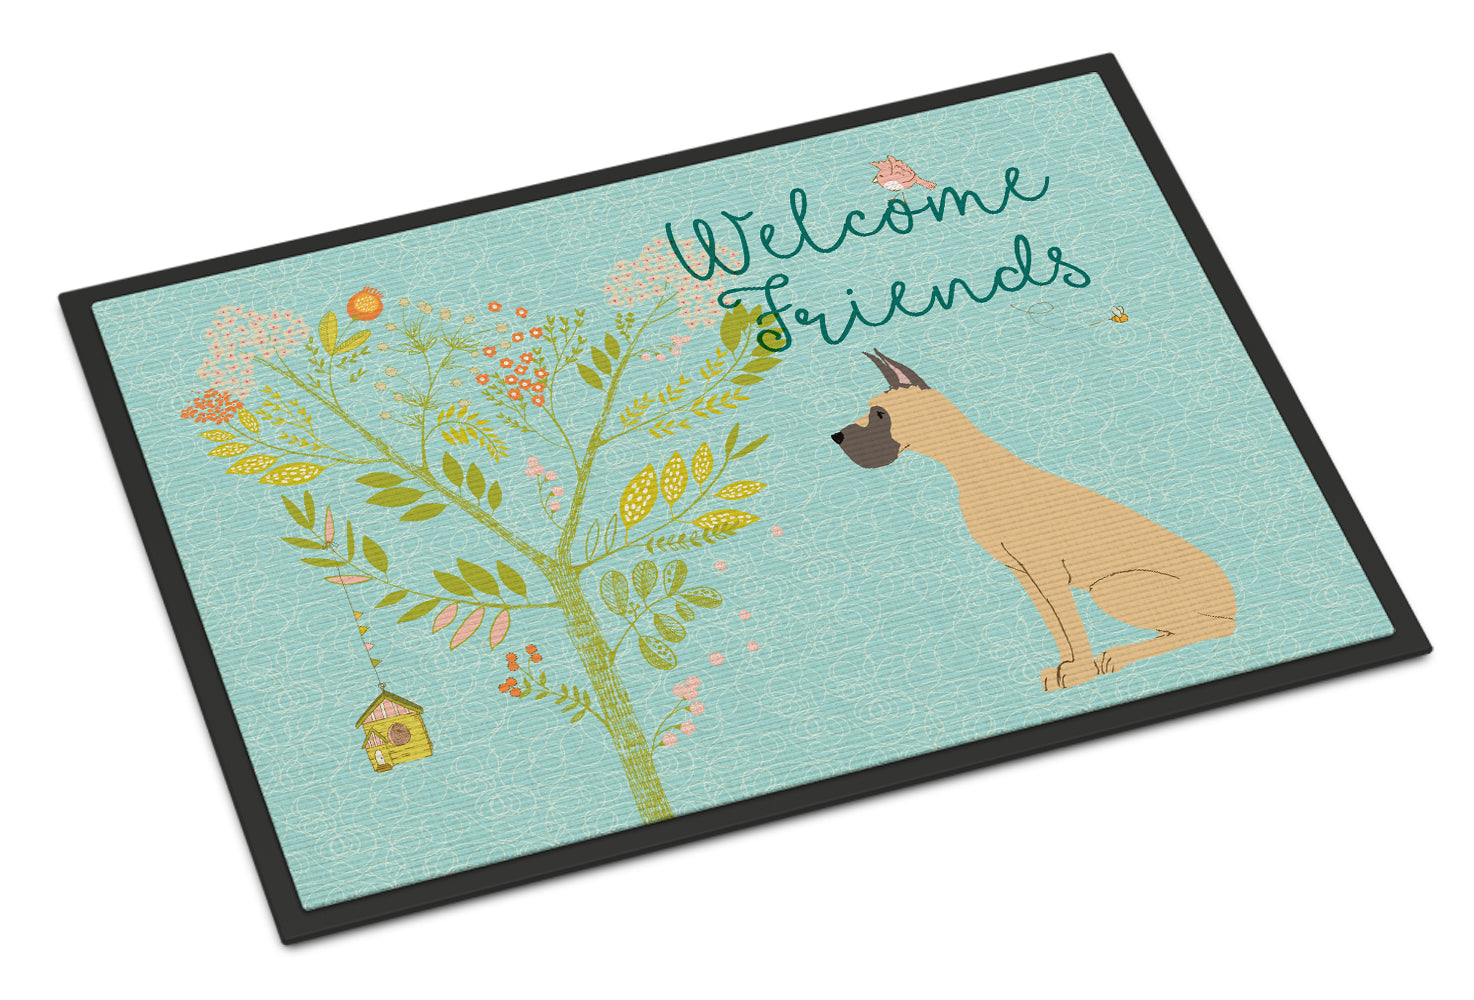 Welcome Friends Fawn Great Dane Cropped Ears Indoor or Outdoor Mat 18x27 BB7589MAT - the-store.com